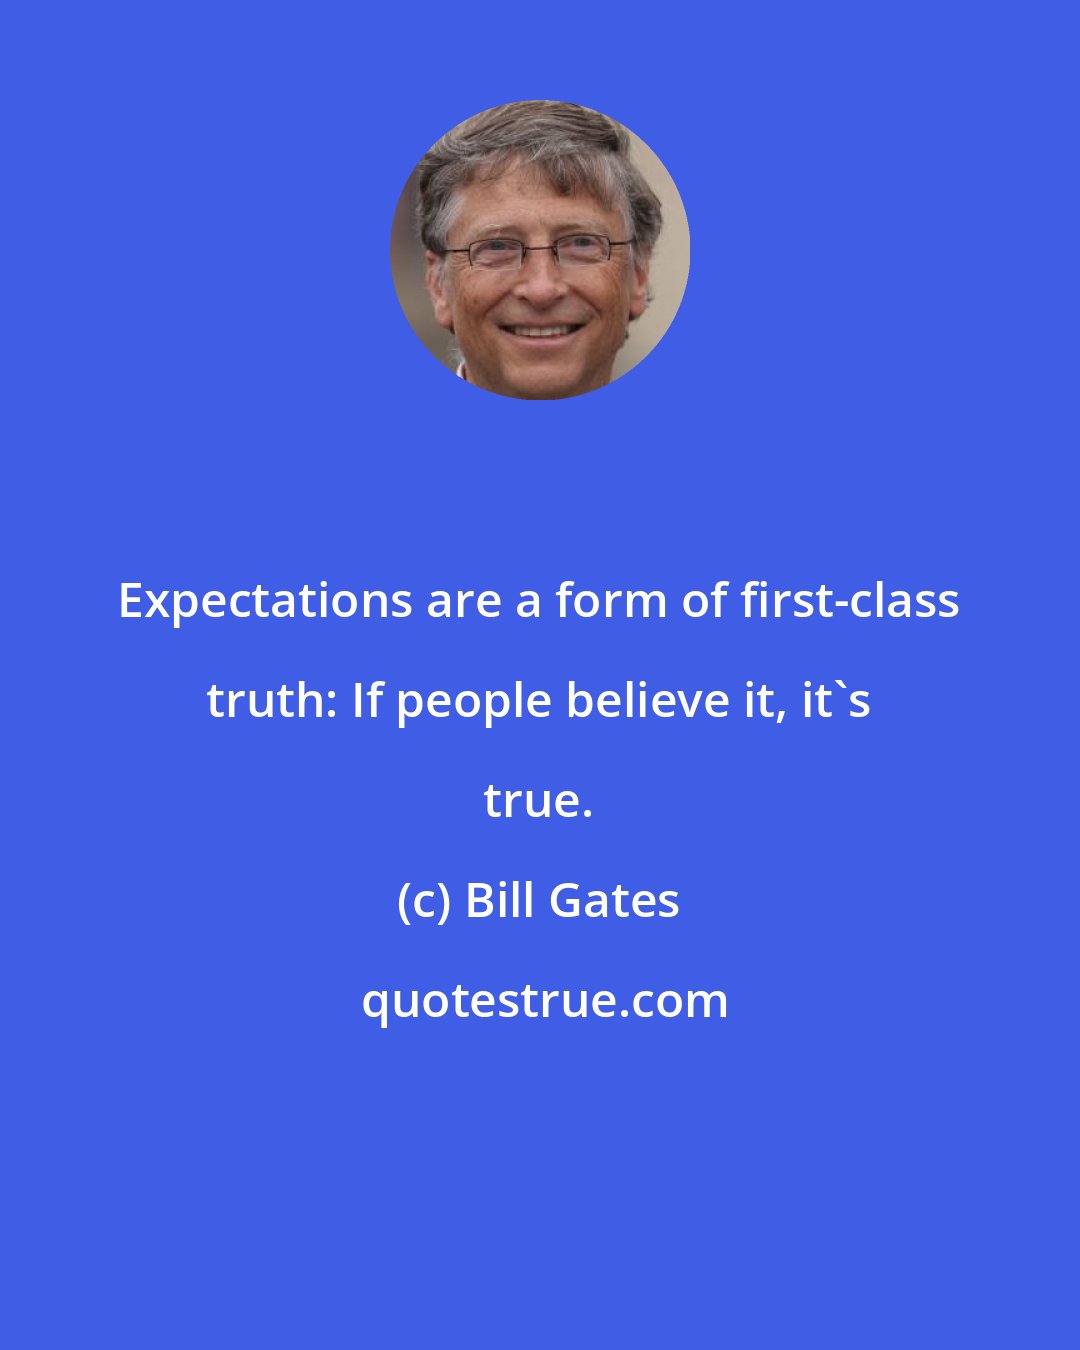 Bill Gates: Expectations are a form of first-class truth: If people believe it, it's true.